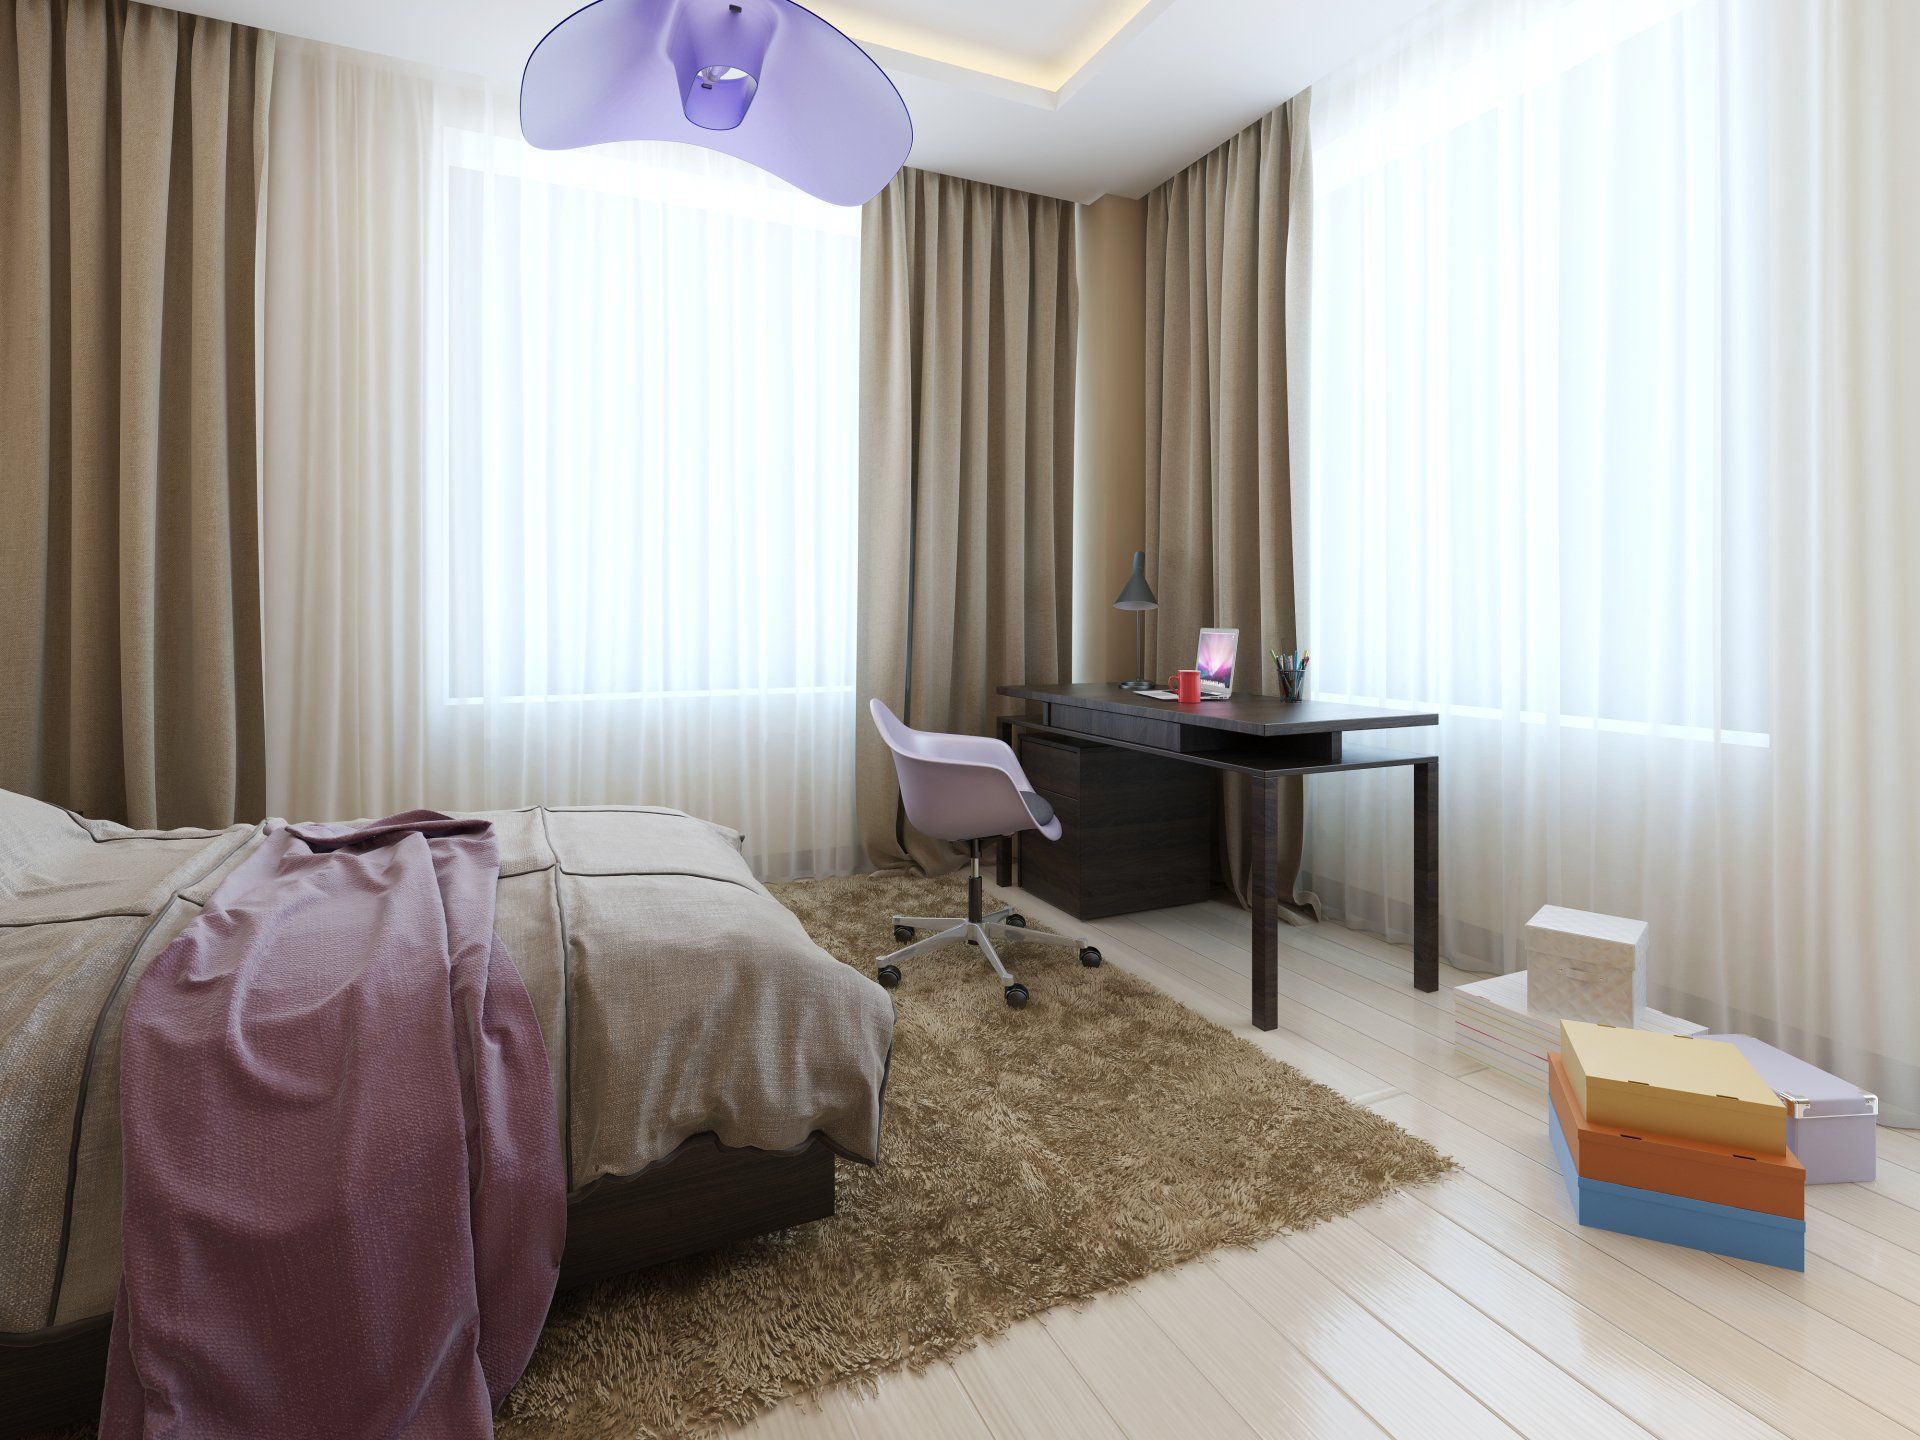 Neutral toned bedroom with blinds pulled back to reveal floor to ceiling sheers. Brown soft run on floor, comfy bed and desk in corner. Neutral tones offset by purple lightshade, throw rug and office chair.